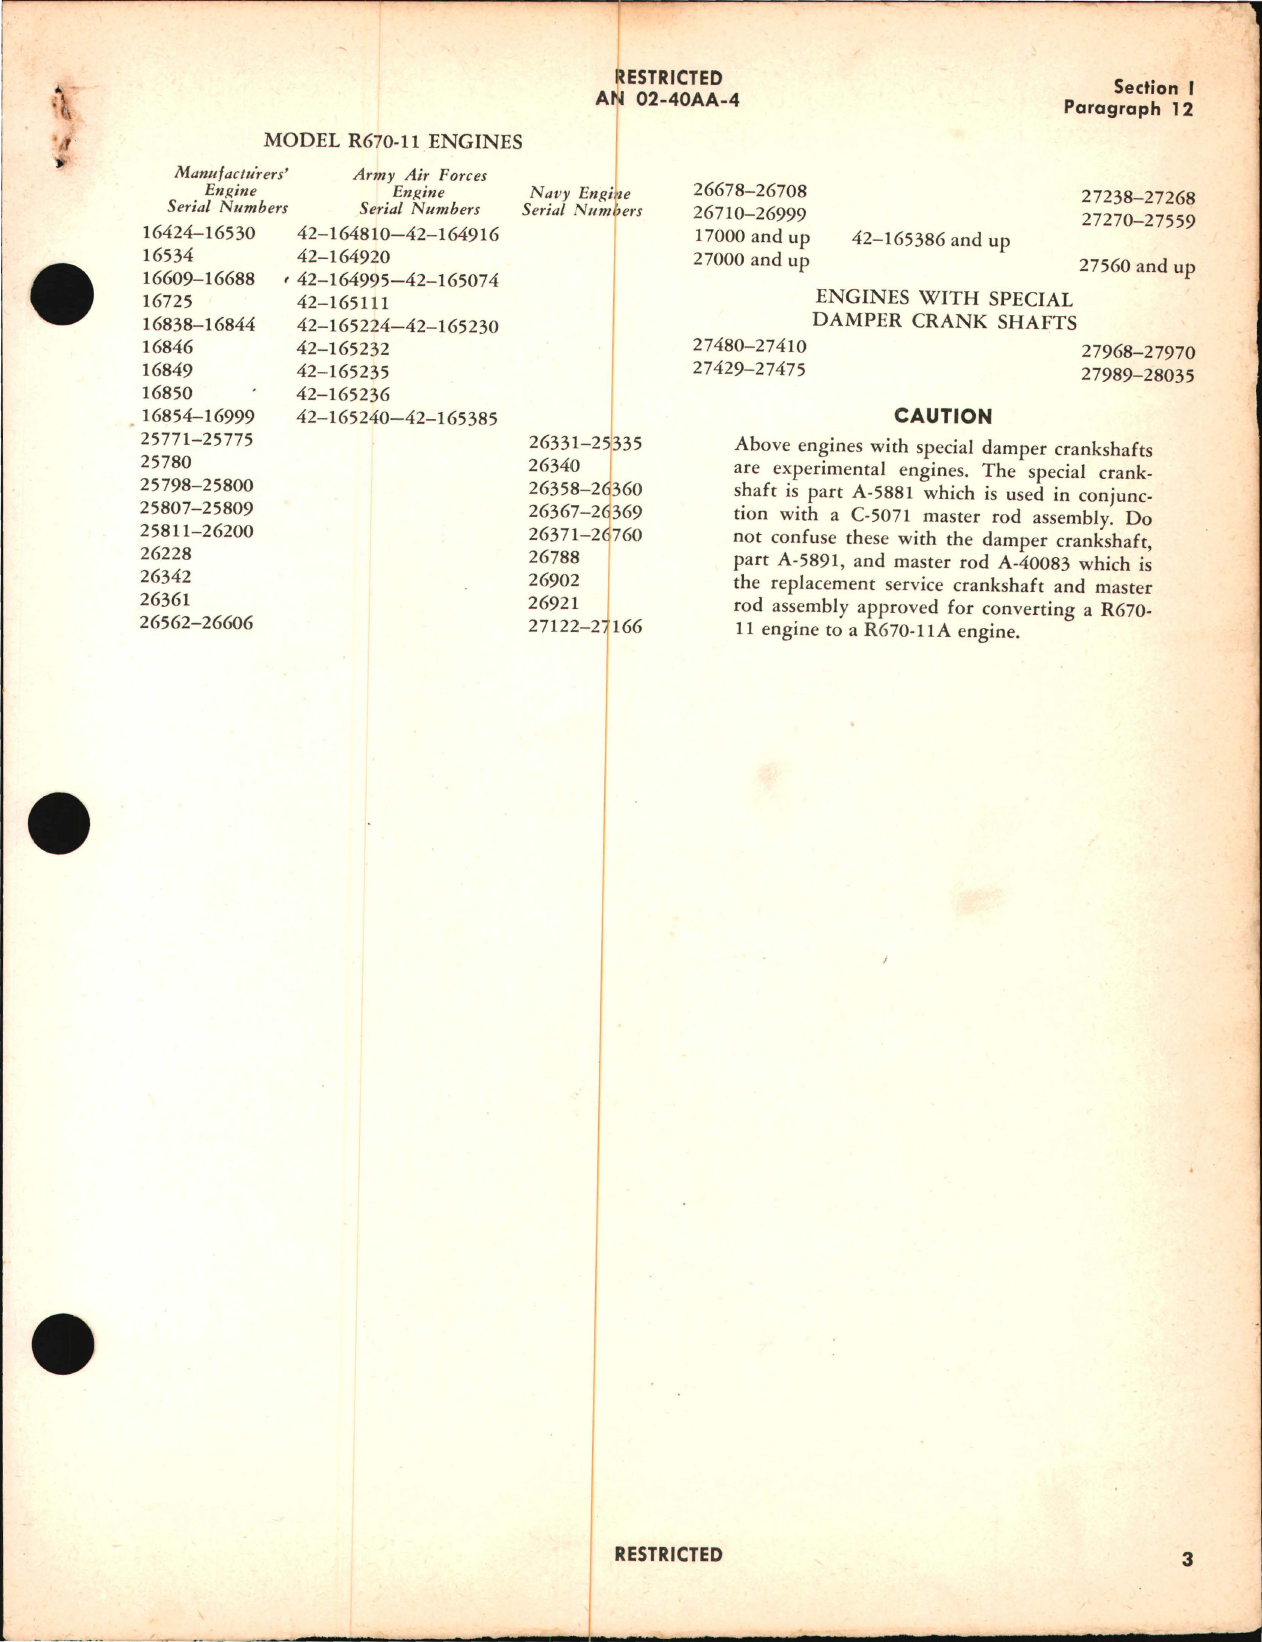 Sample page 7 from AirCorps Library document: Parts Catalog for Aircraft Engines R-670-4, R-670-5, R-670-6, and R-670-11